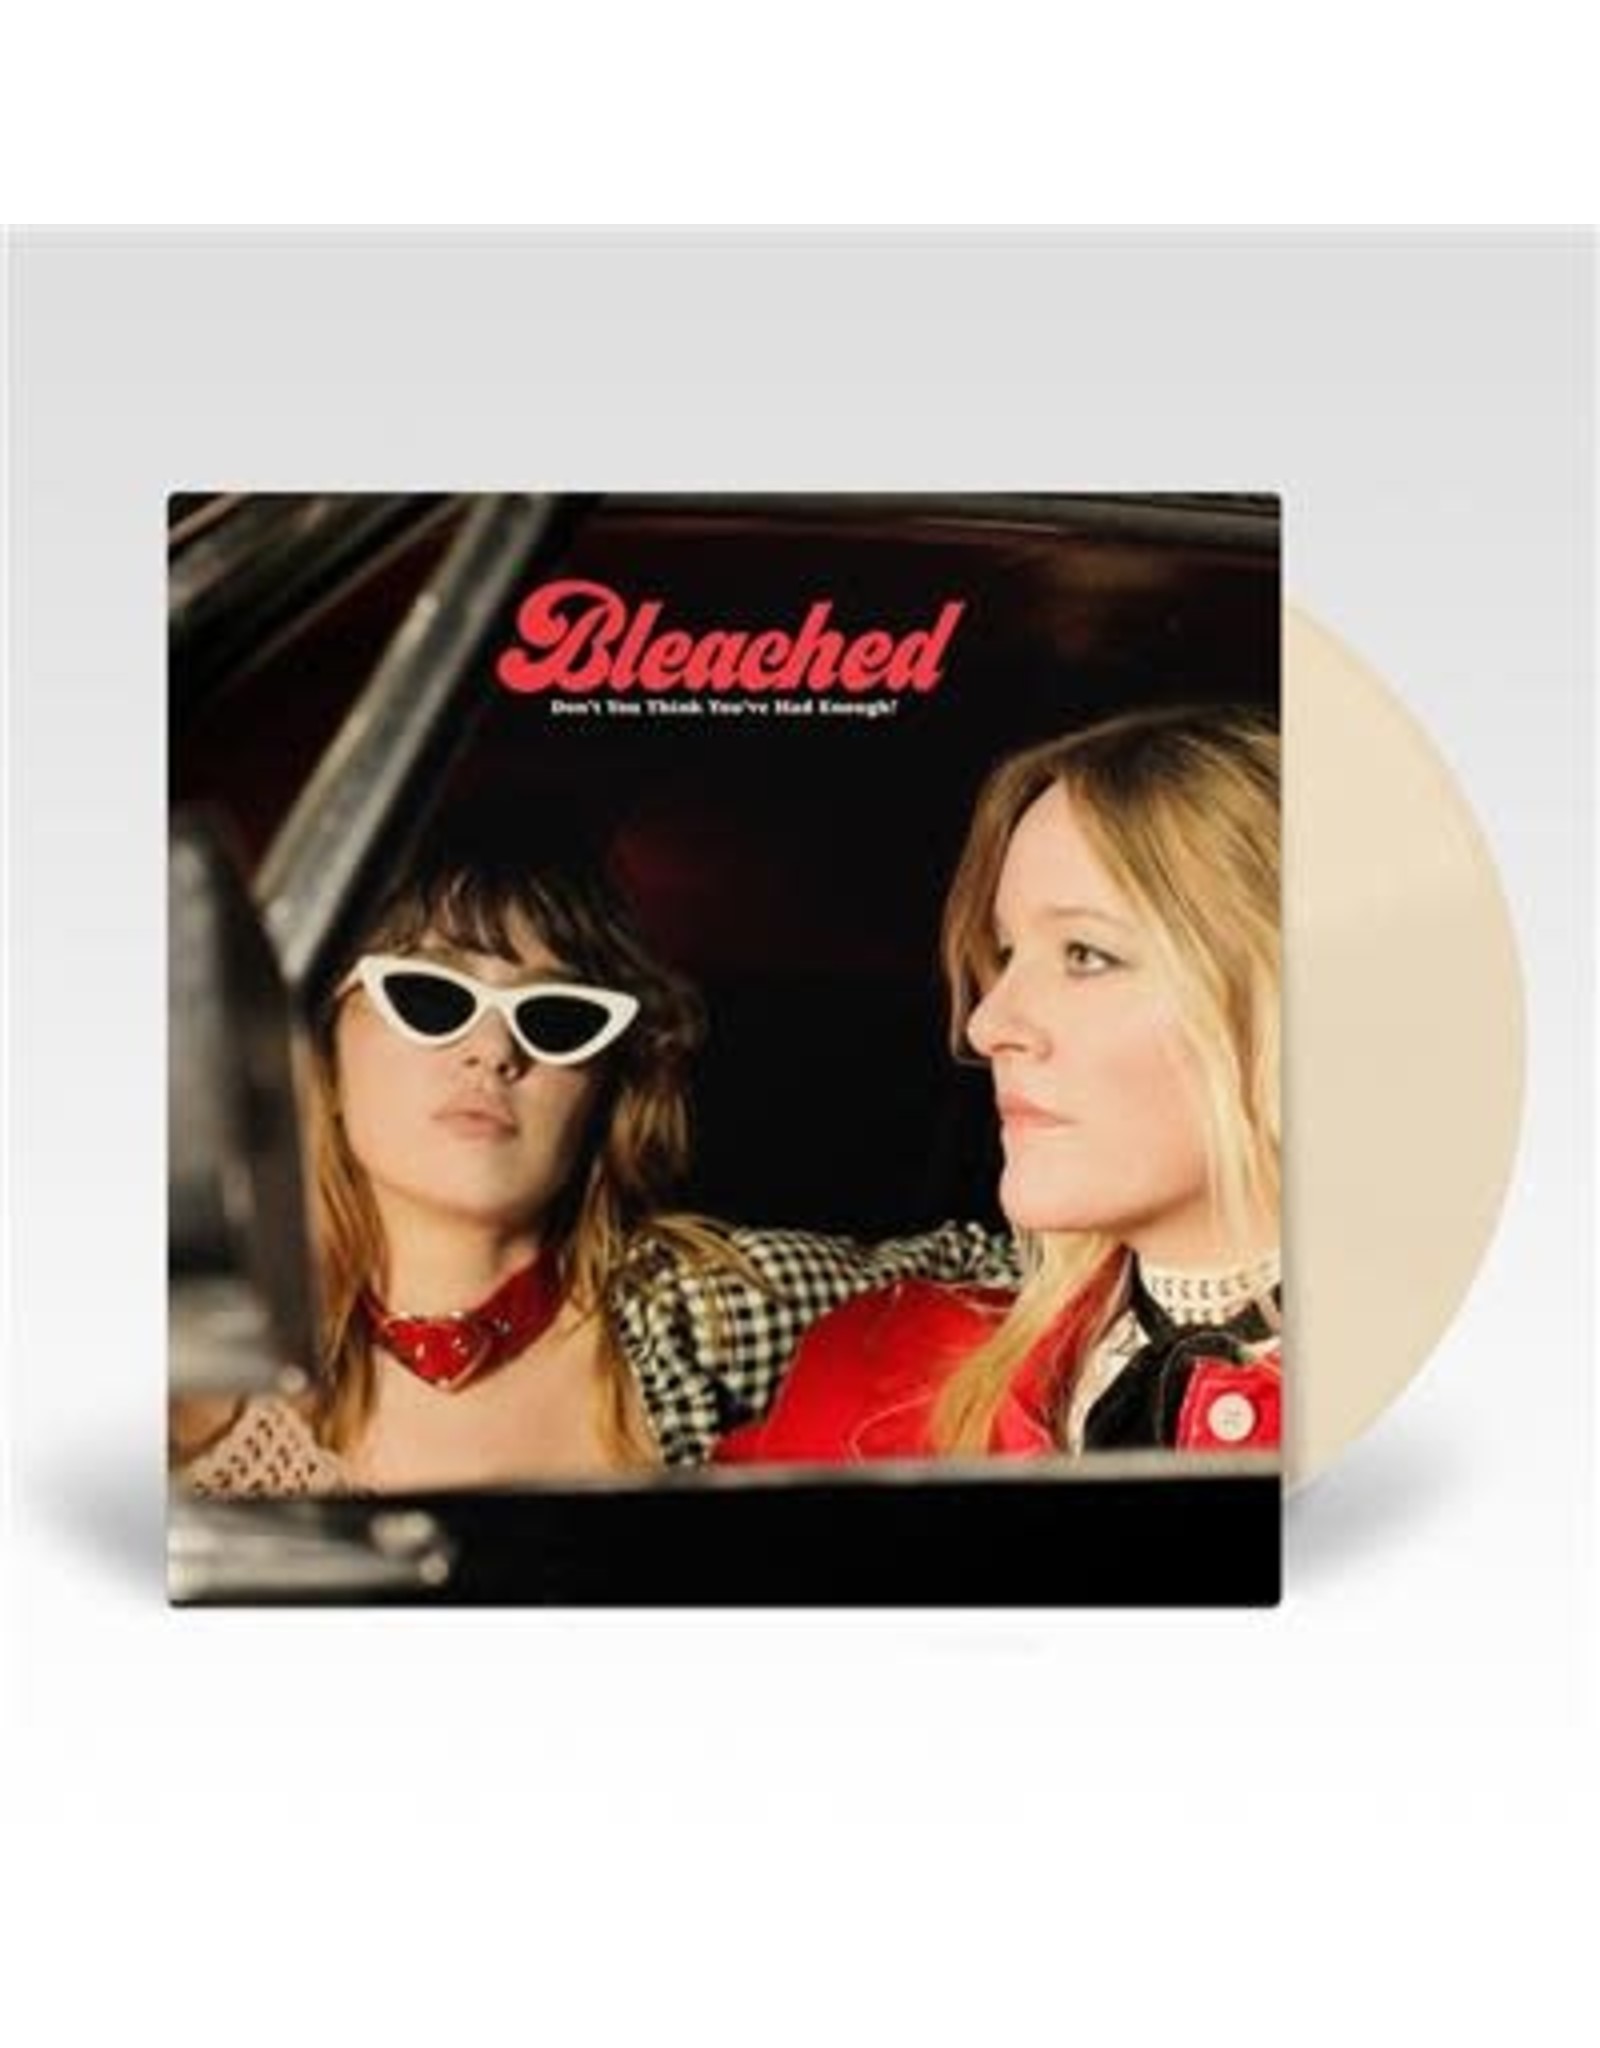 Bleached - Don't You Think You've Had Enough? (Opaque Cream Vinyl)